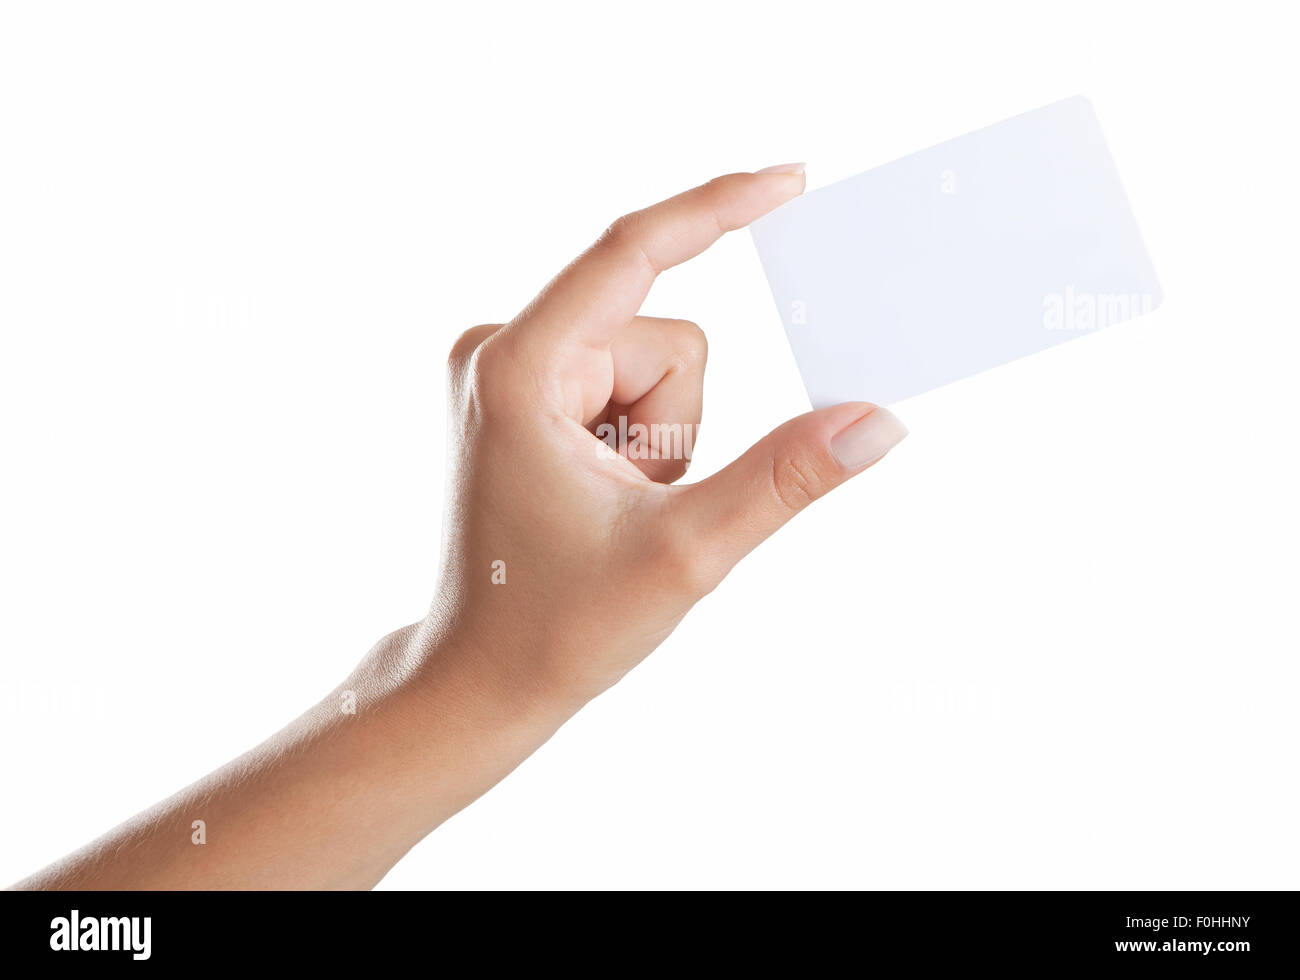 Woman's hand holding a business card against white background, no text Stock Photo